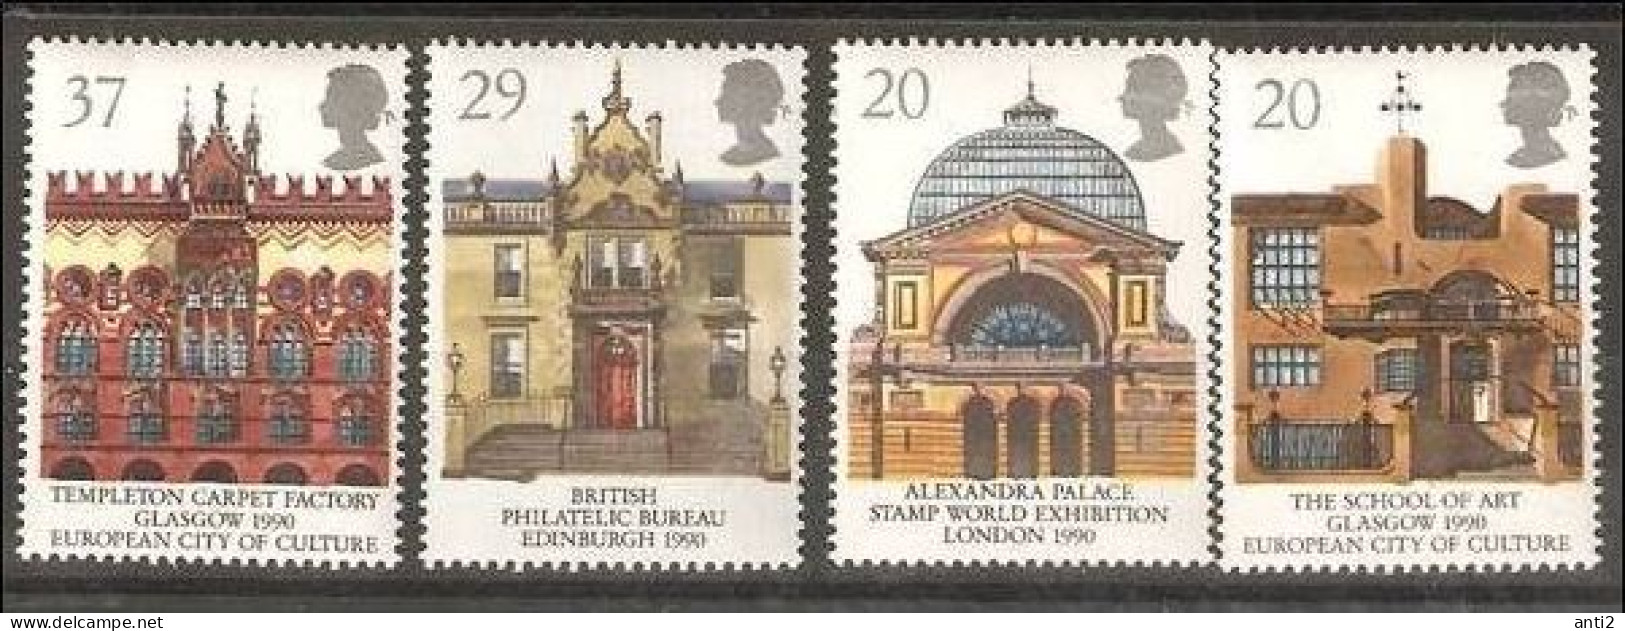 Great Britain 1990 Buildings And Europe Cept, Mi 1261-1264 MNH - Unused Stamps